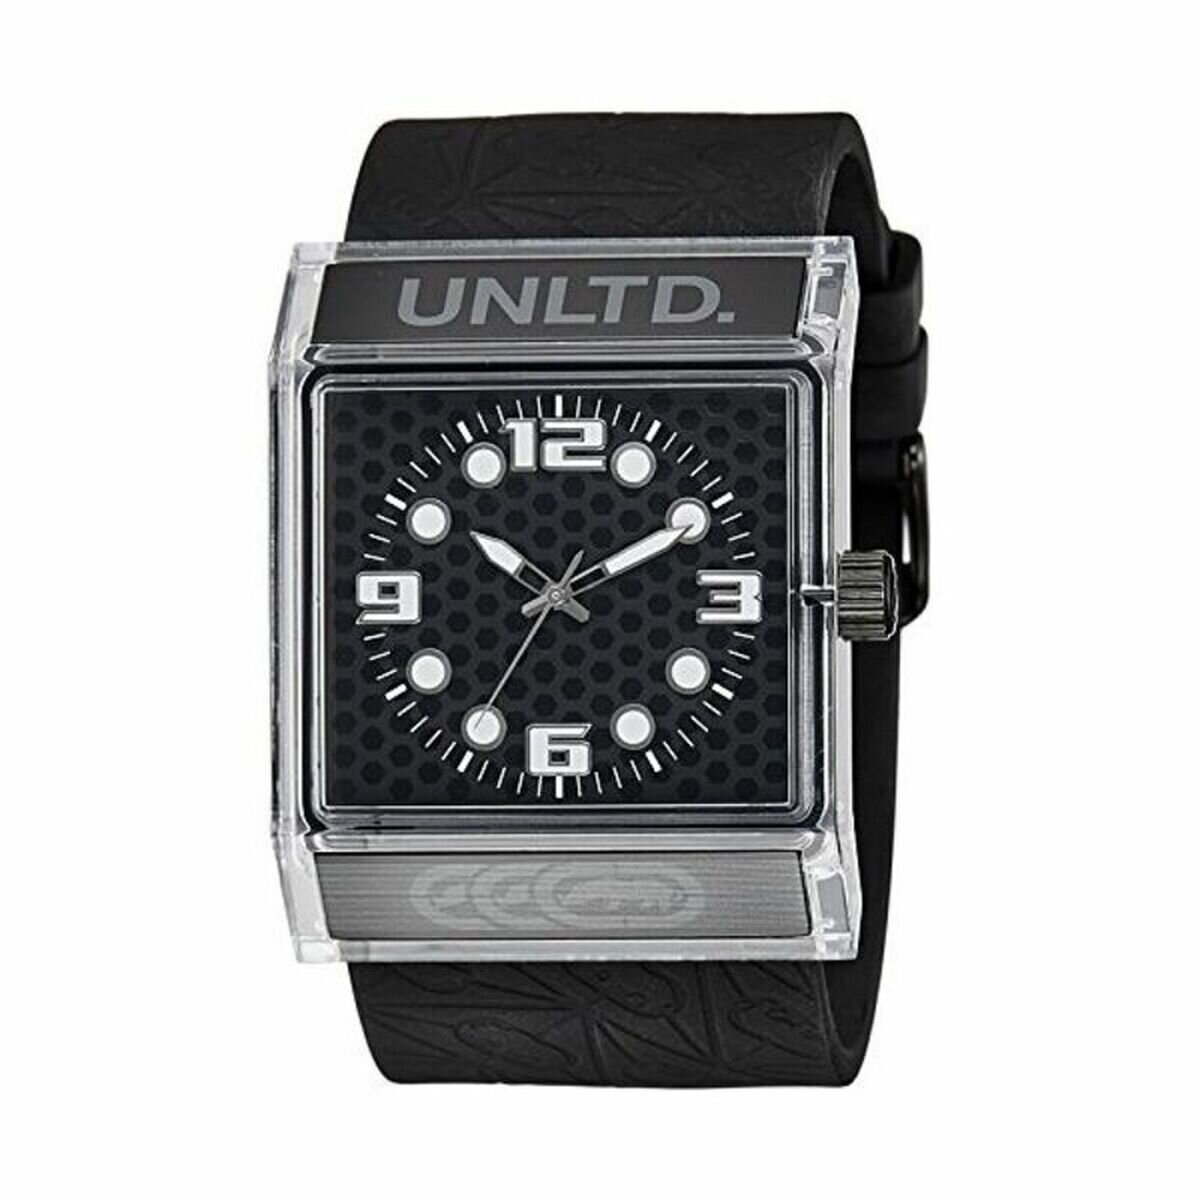 Mens Black square faced watch